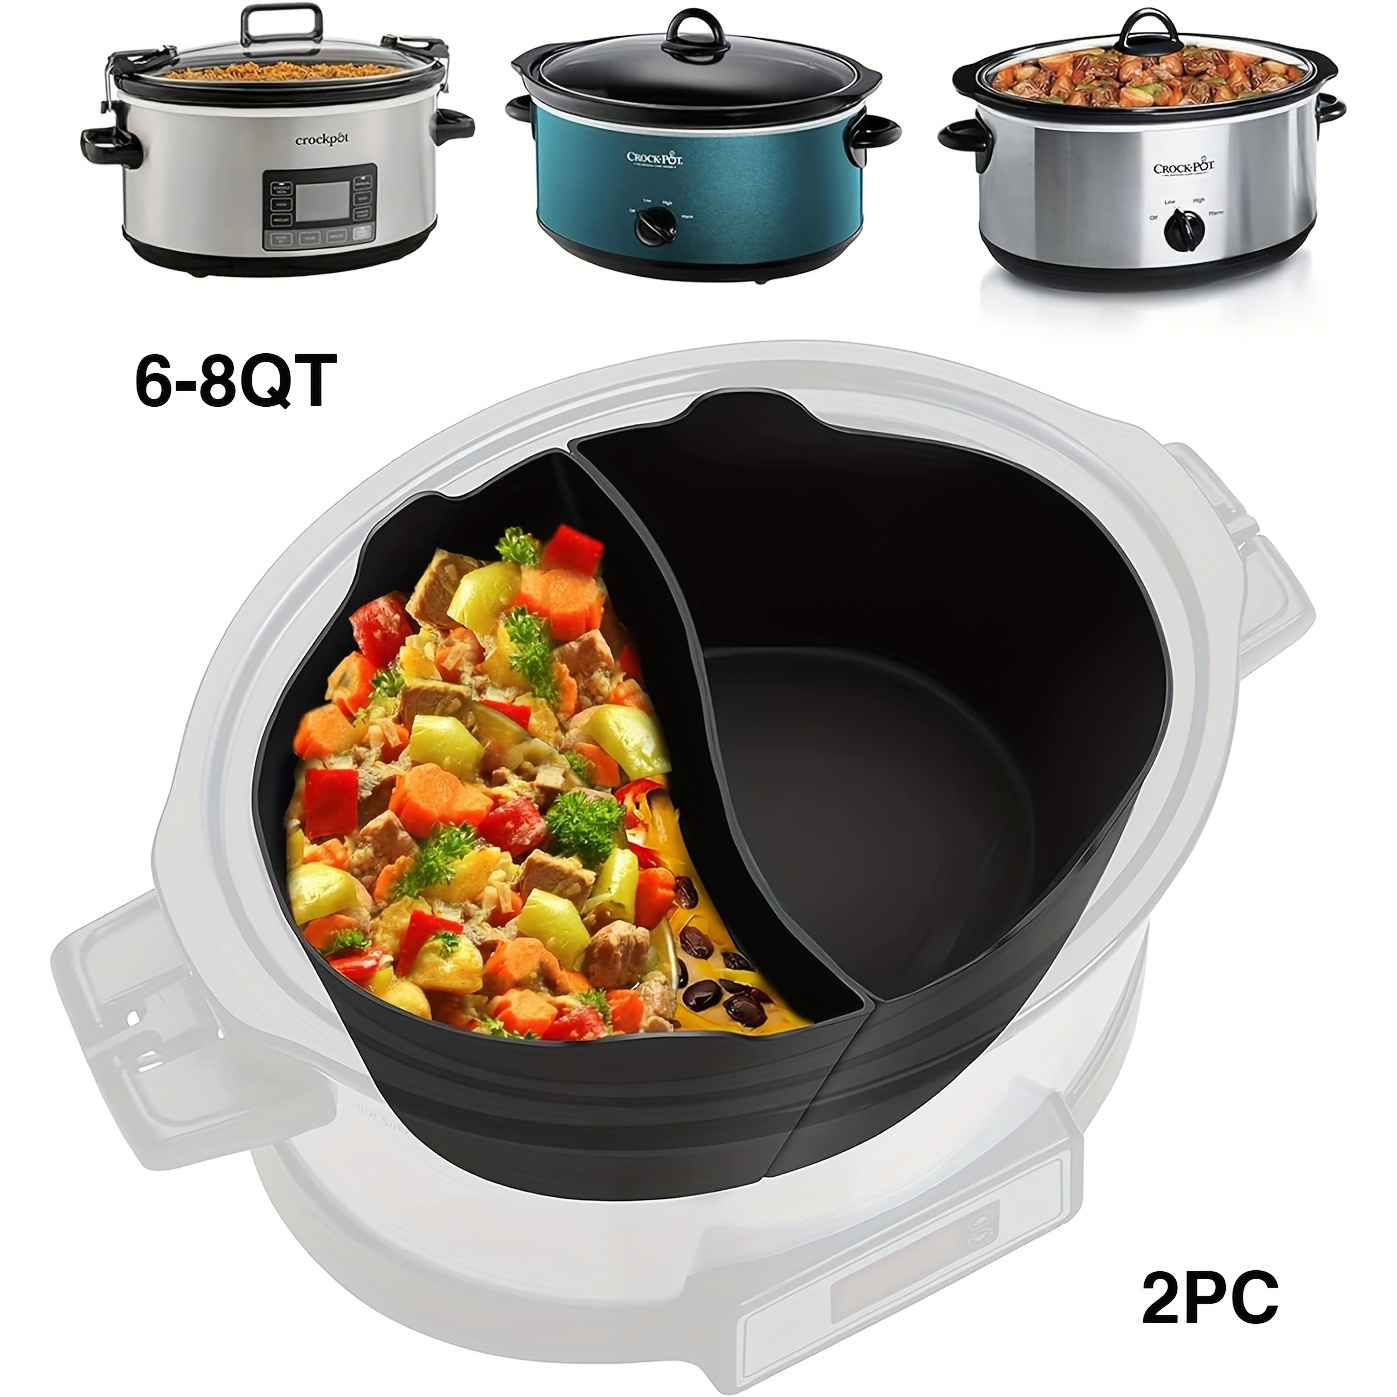 https://img.kwcdn.com/product/slow-cooker-silicone-liners/d69d2f15w98k18-c6e46d00/Fancyalgo/VirtualModelMatting/0796ae7a6a2052ad34fc87832082db97.jpg